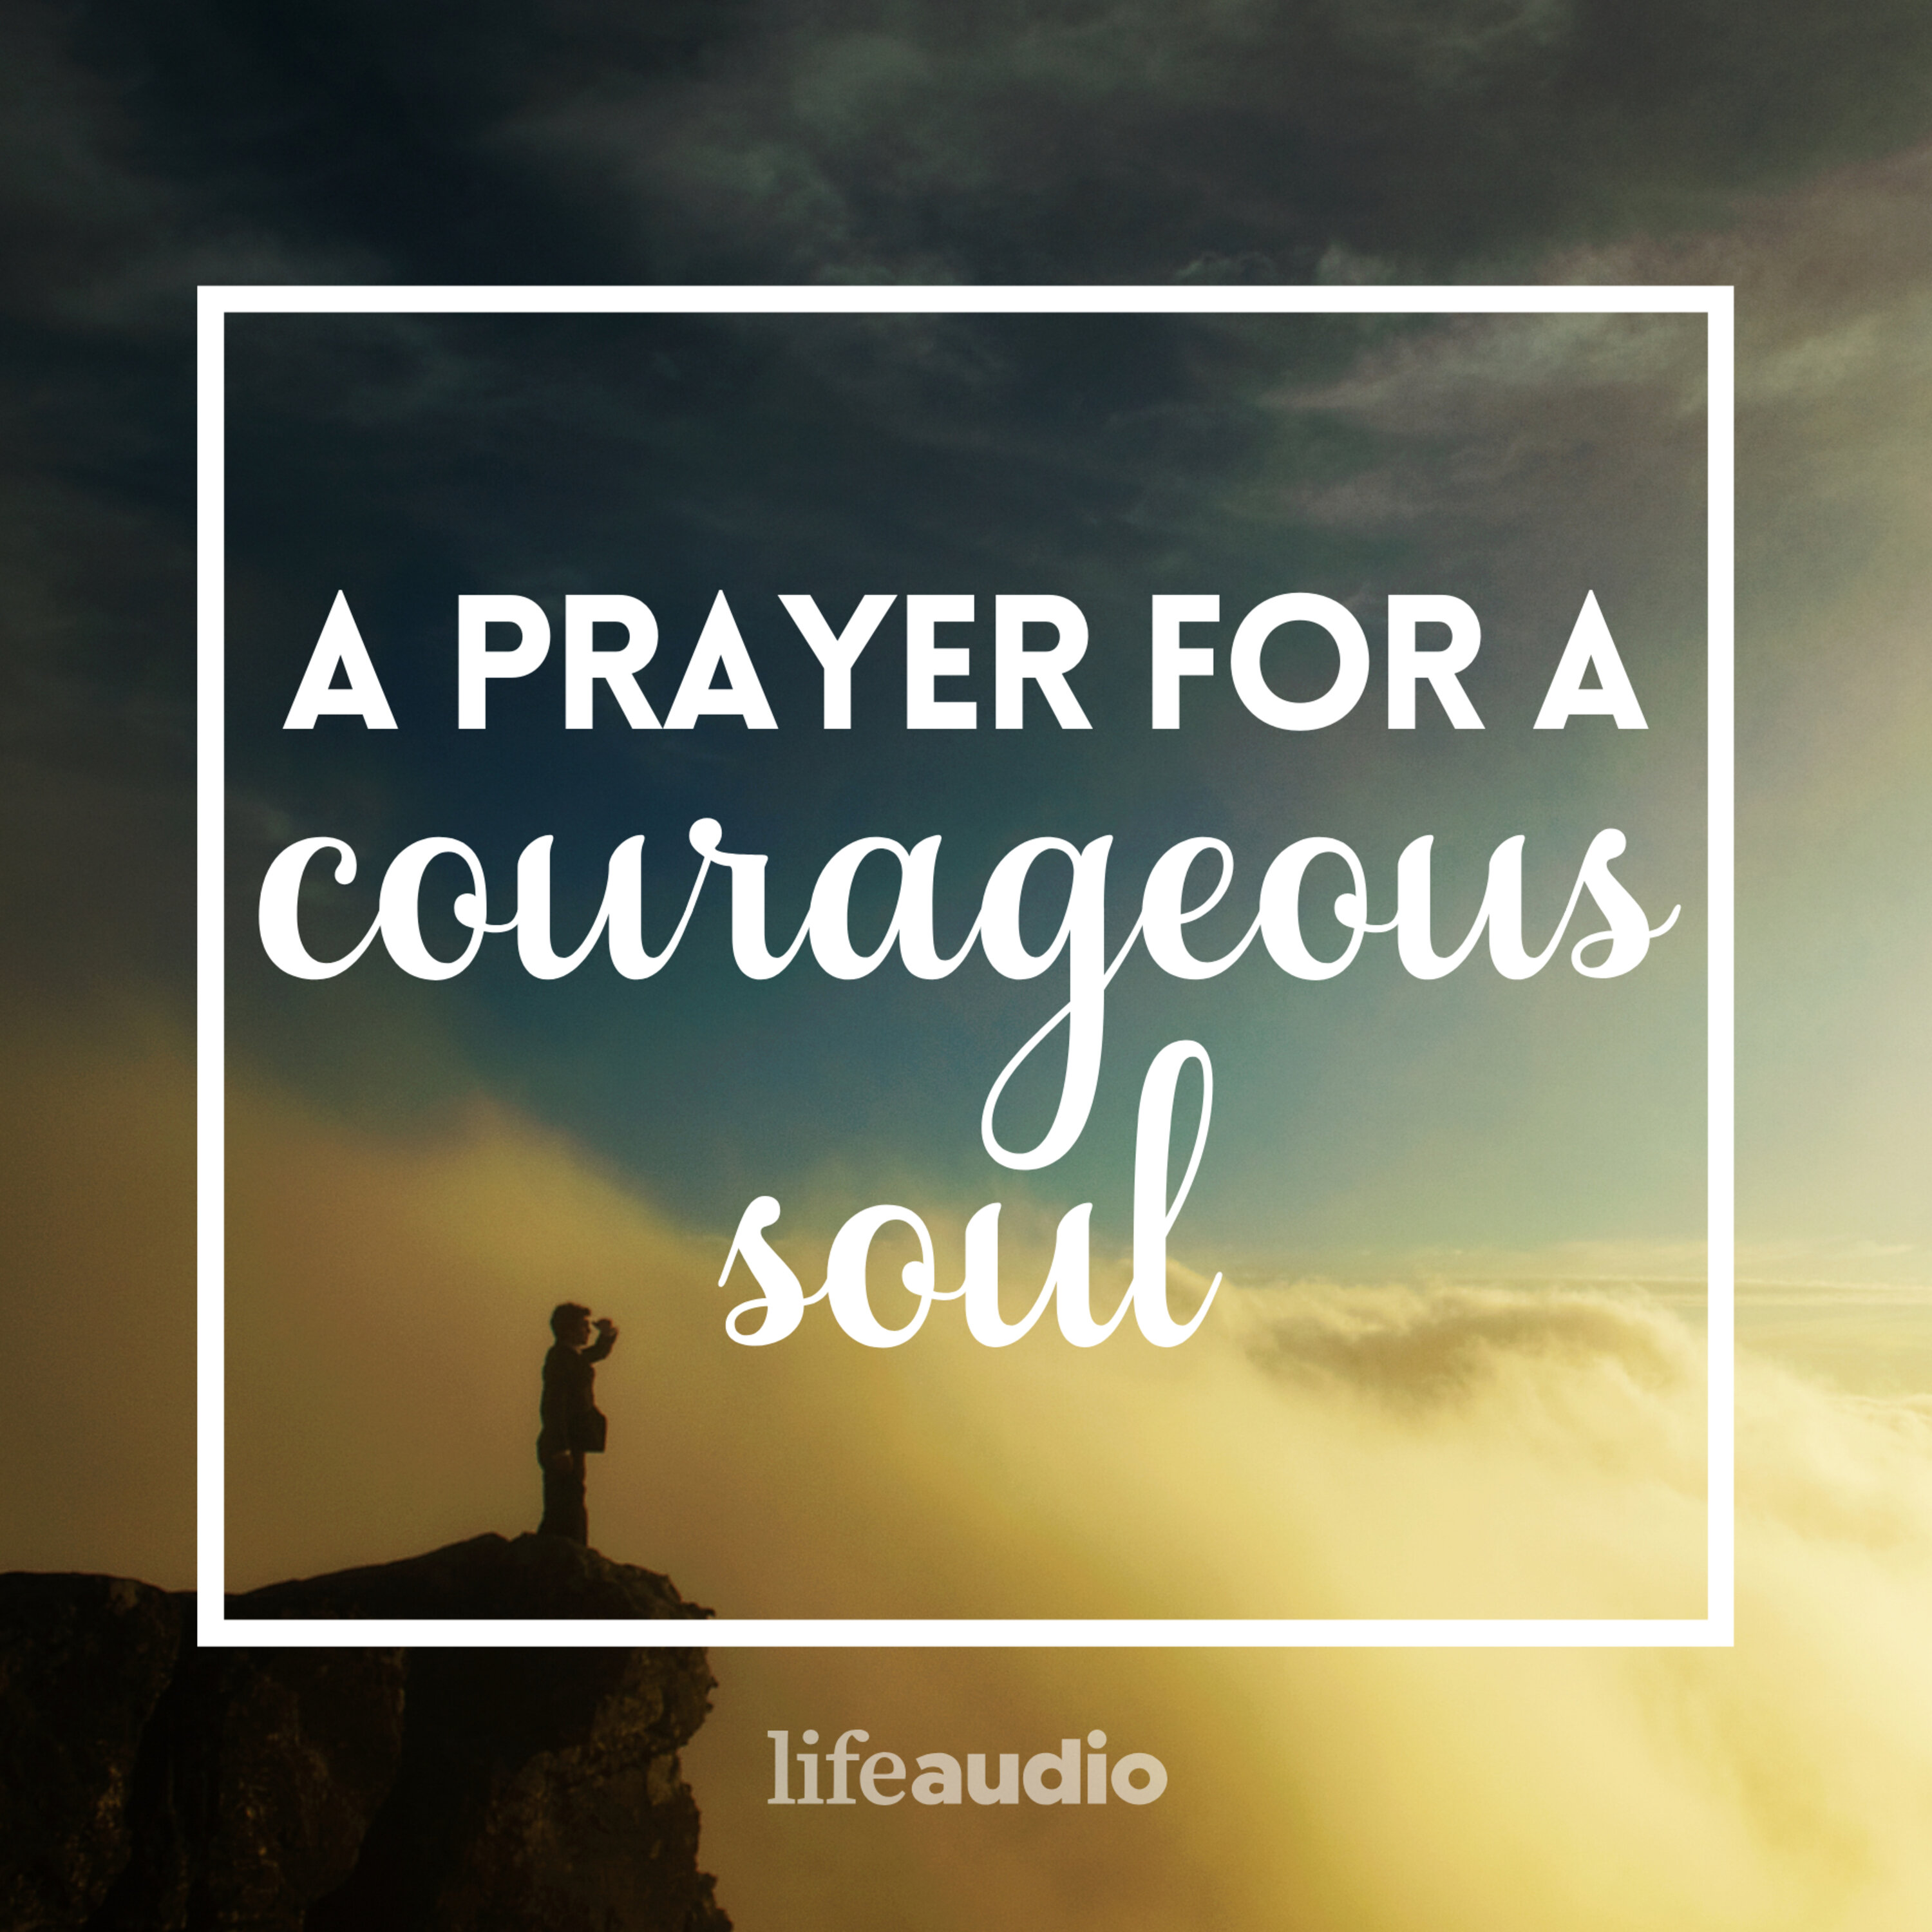 A Prayer for a Courageous Soul